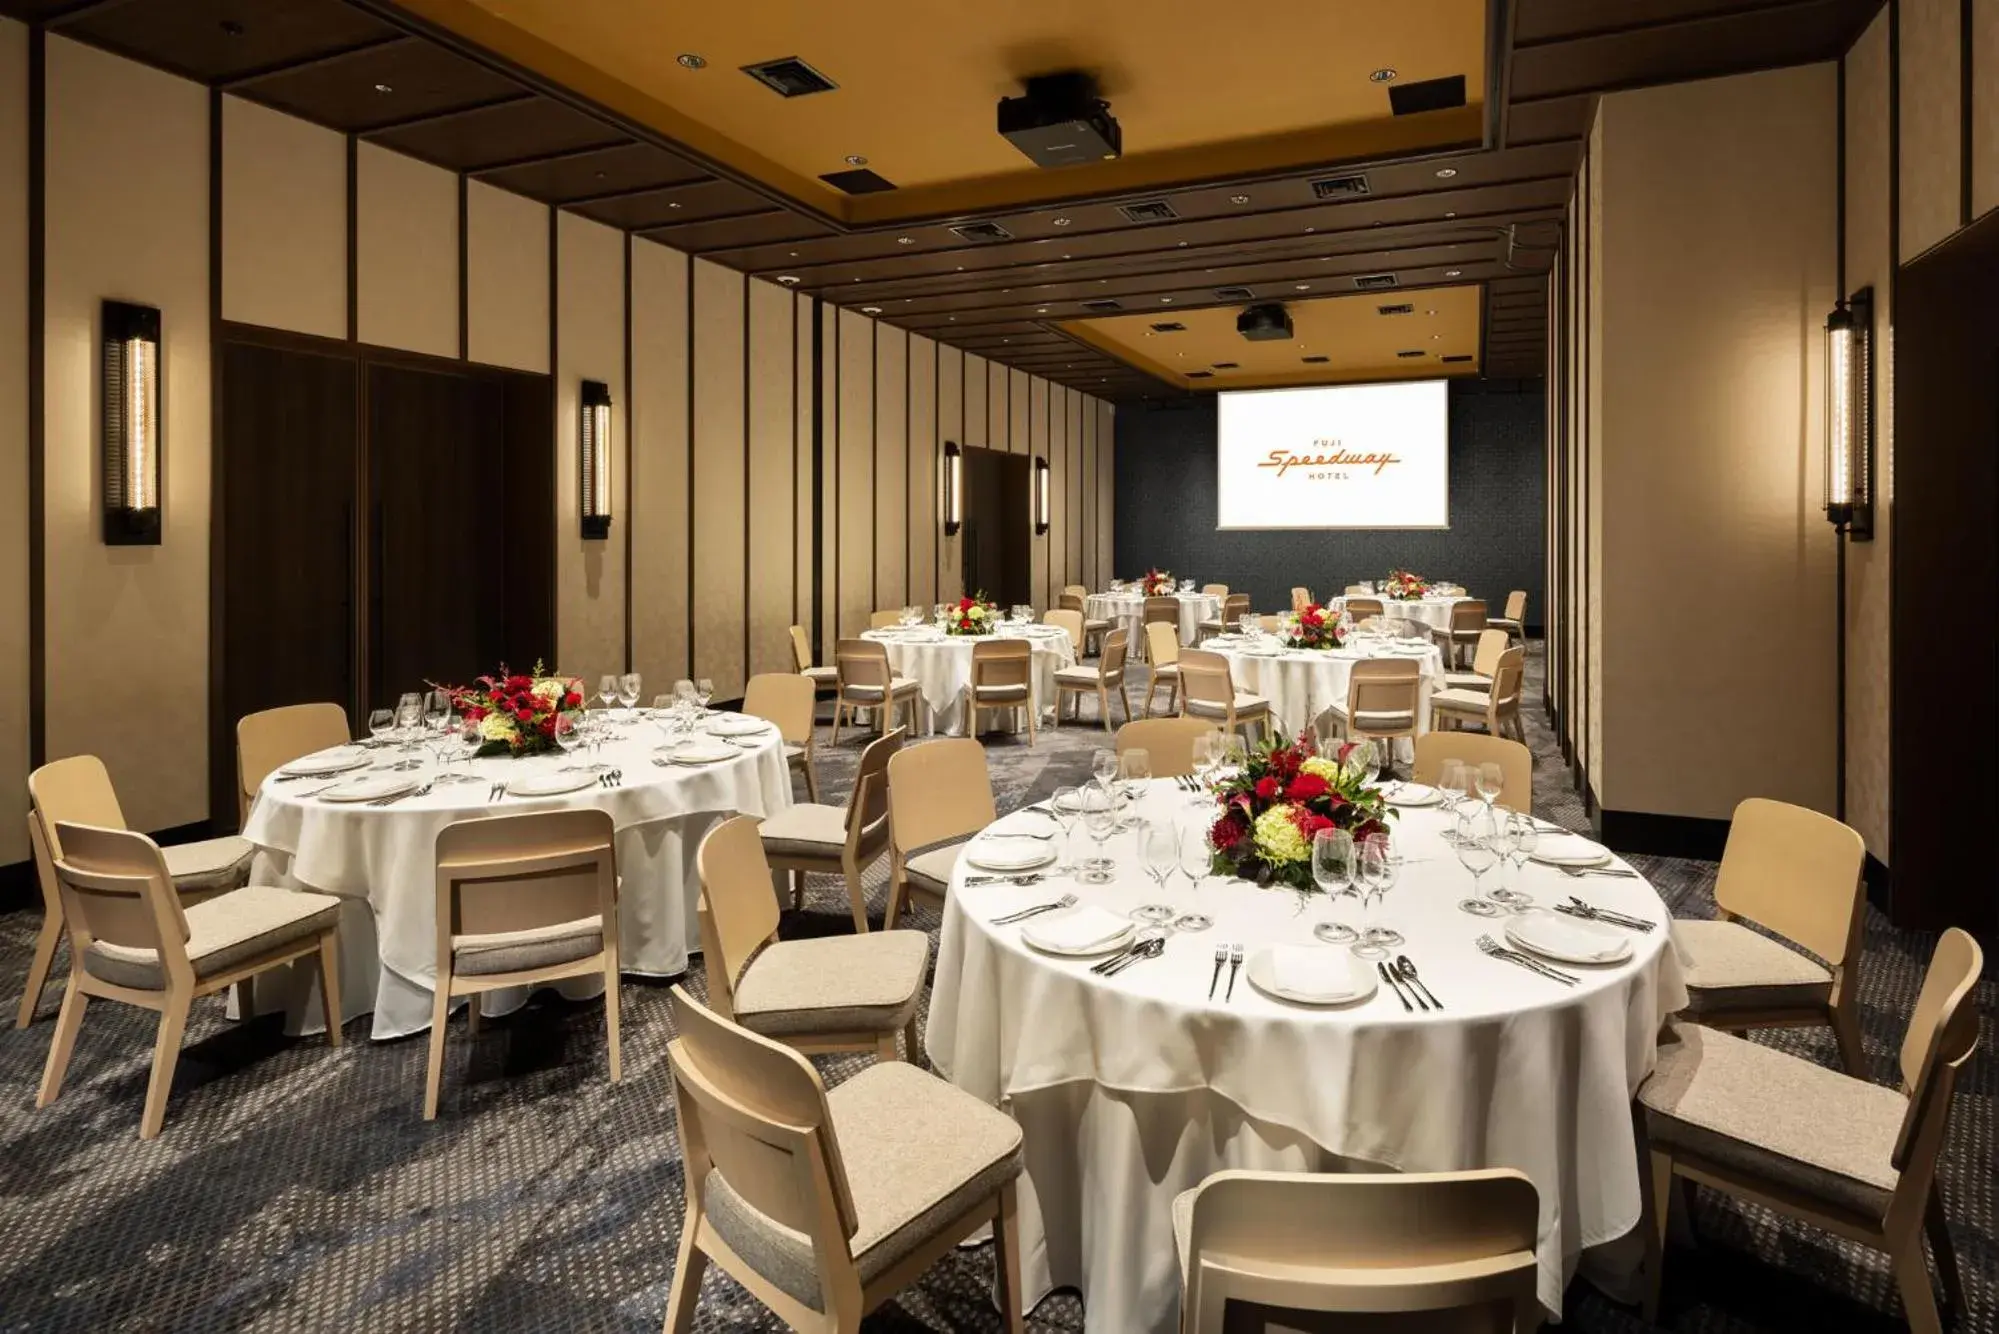 Banquet/Function facilities, Banquet Facilities in Fuji Speedway Hotel, Unbound Collection by Hyatt